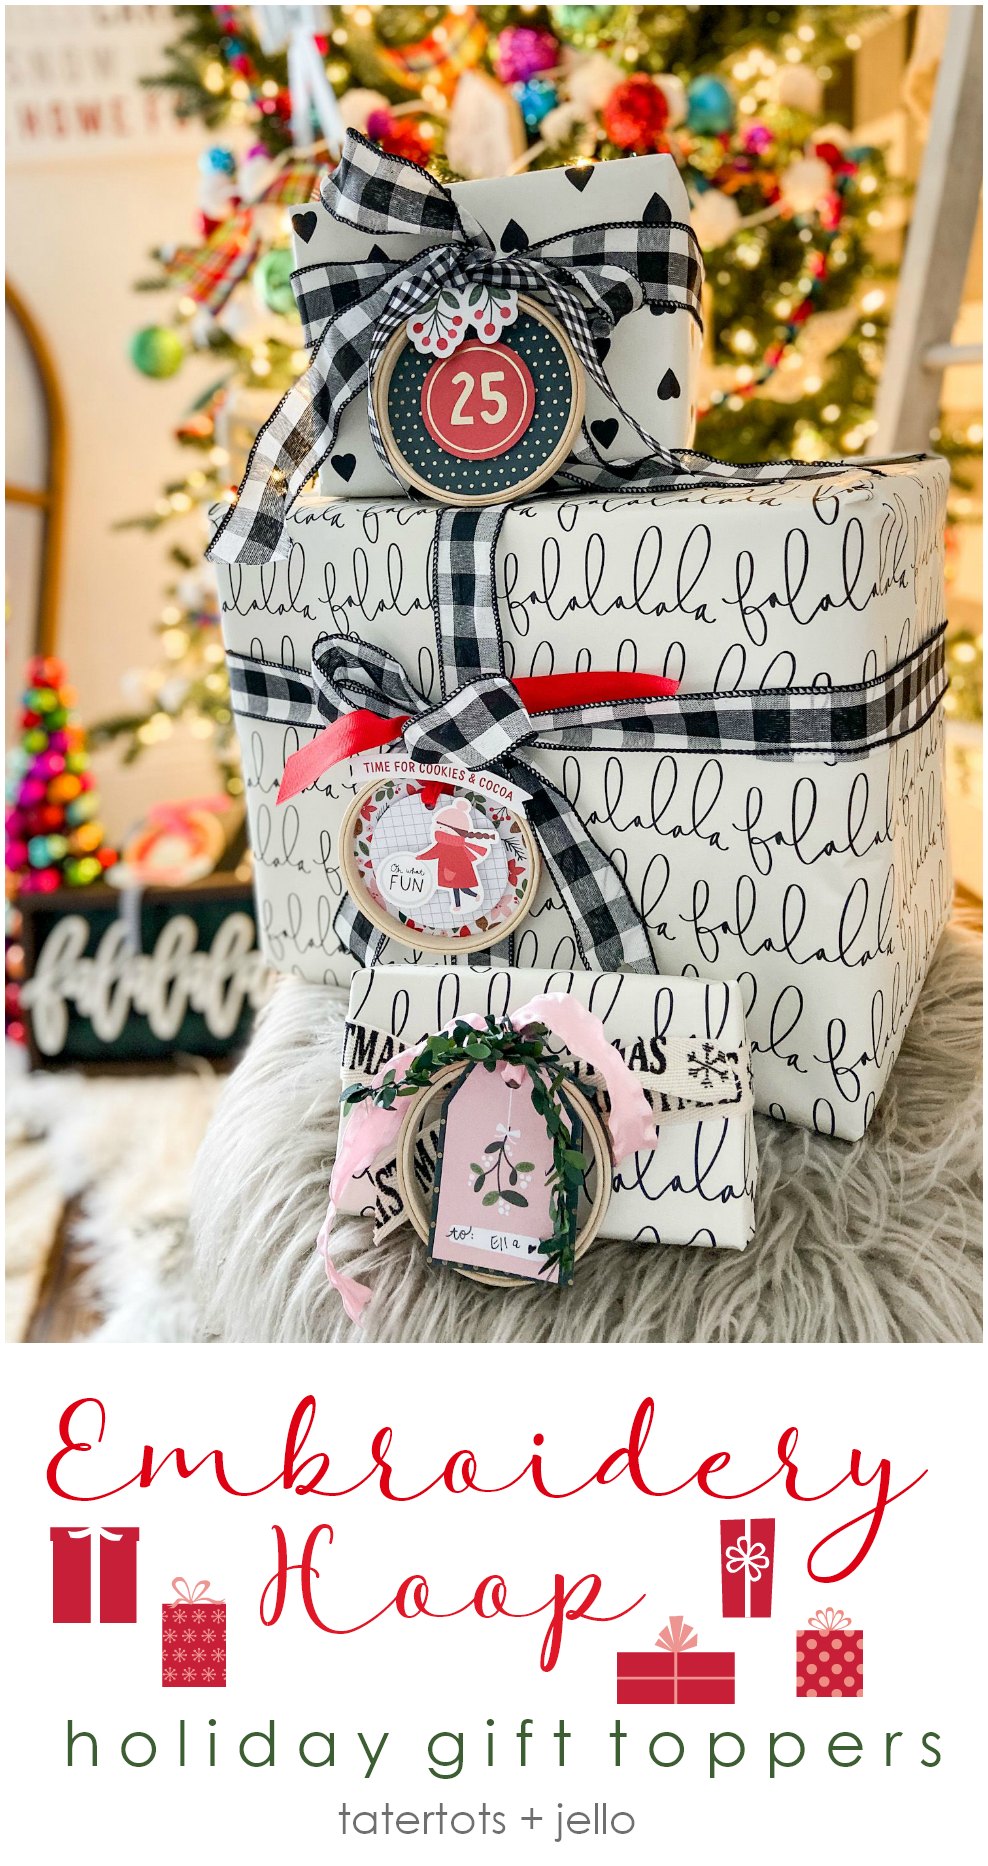 Embroidery Hoop Holiday Gift Toppers. Create adorable holiday gift toppers ornaments with embroidery hoops and paper! They can be used each year as ornaments.